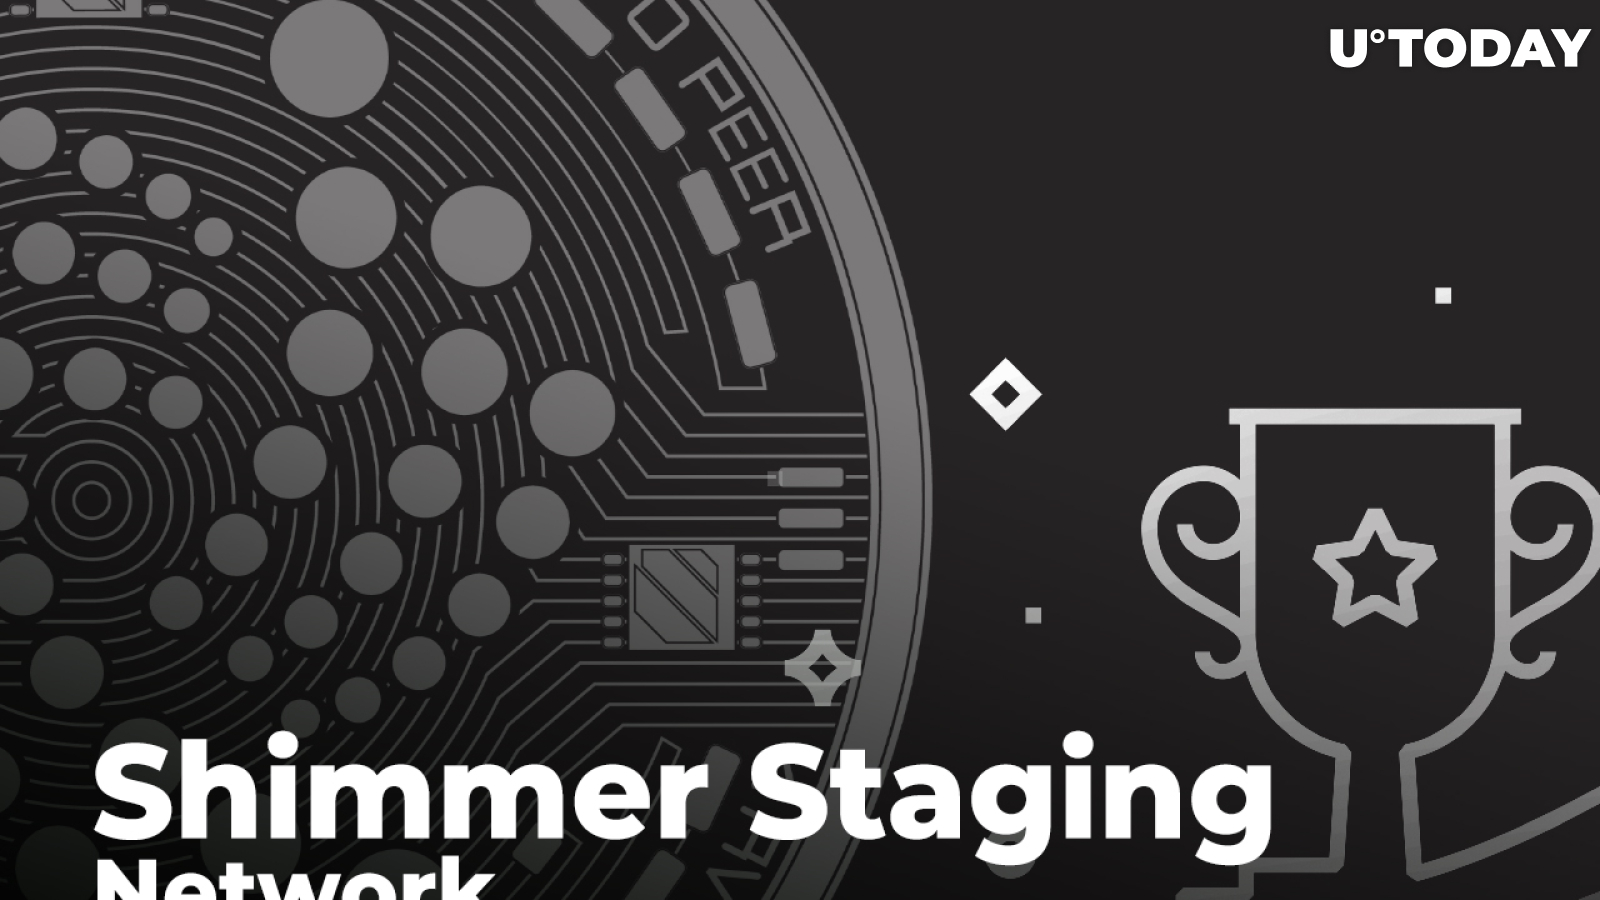 IOTA Launches Shimmer Staging Network and Introduces Staking Rewards